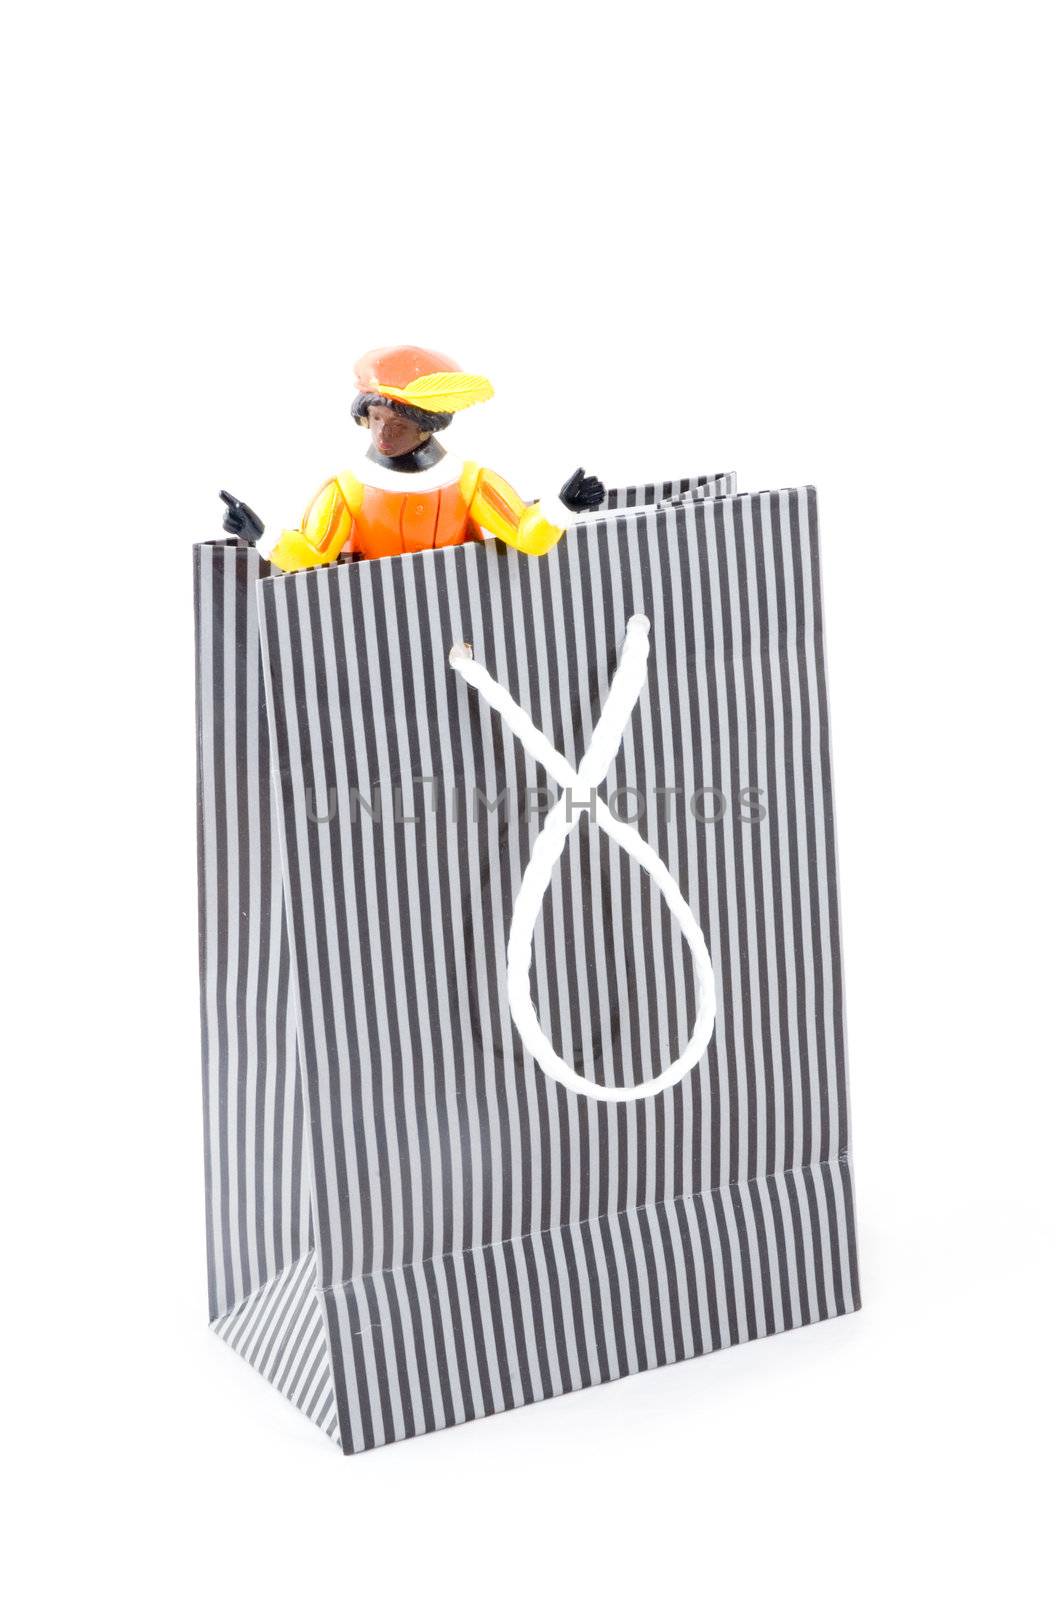 zwarte pieten in a shopping bag, characters from a traditional dutch holiday; isolated on white